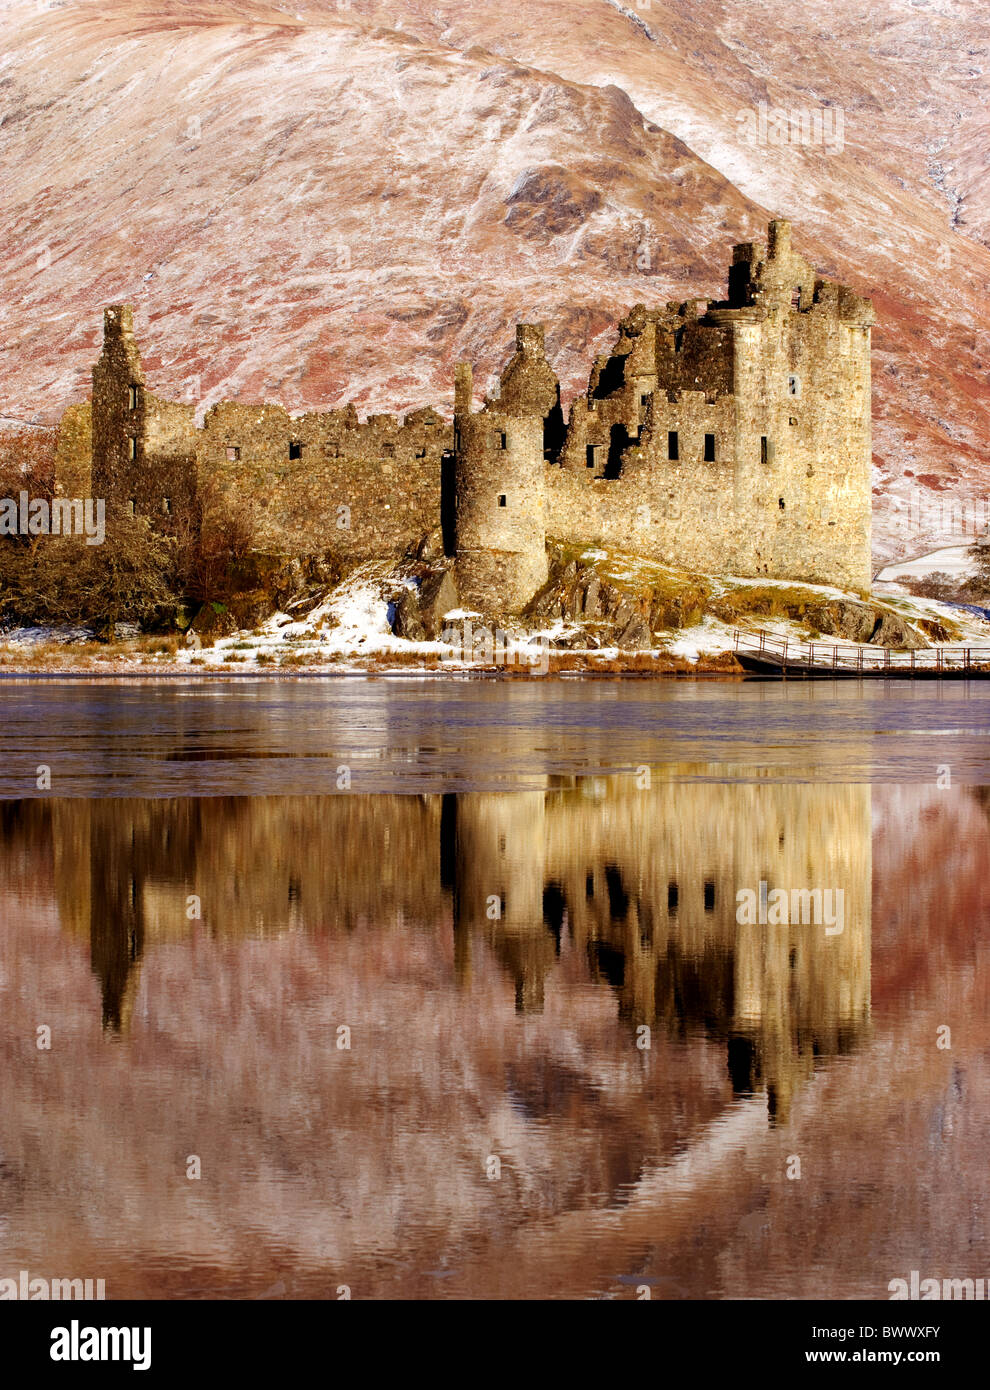 Looking across a partly frozen Loch Awe to the ruins of Kilchurn Castle in Argyle, Scotland. Stock Photo